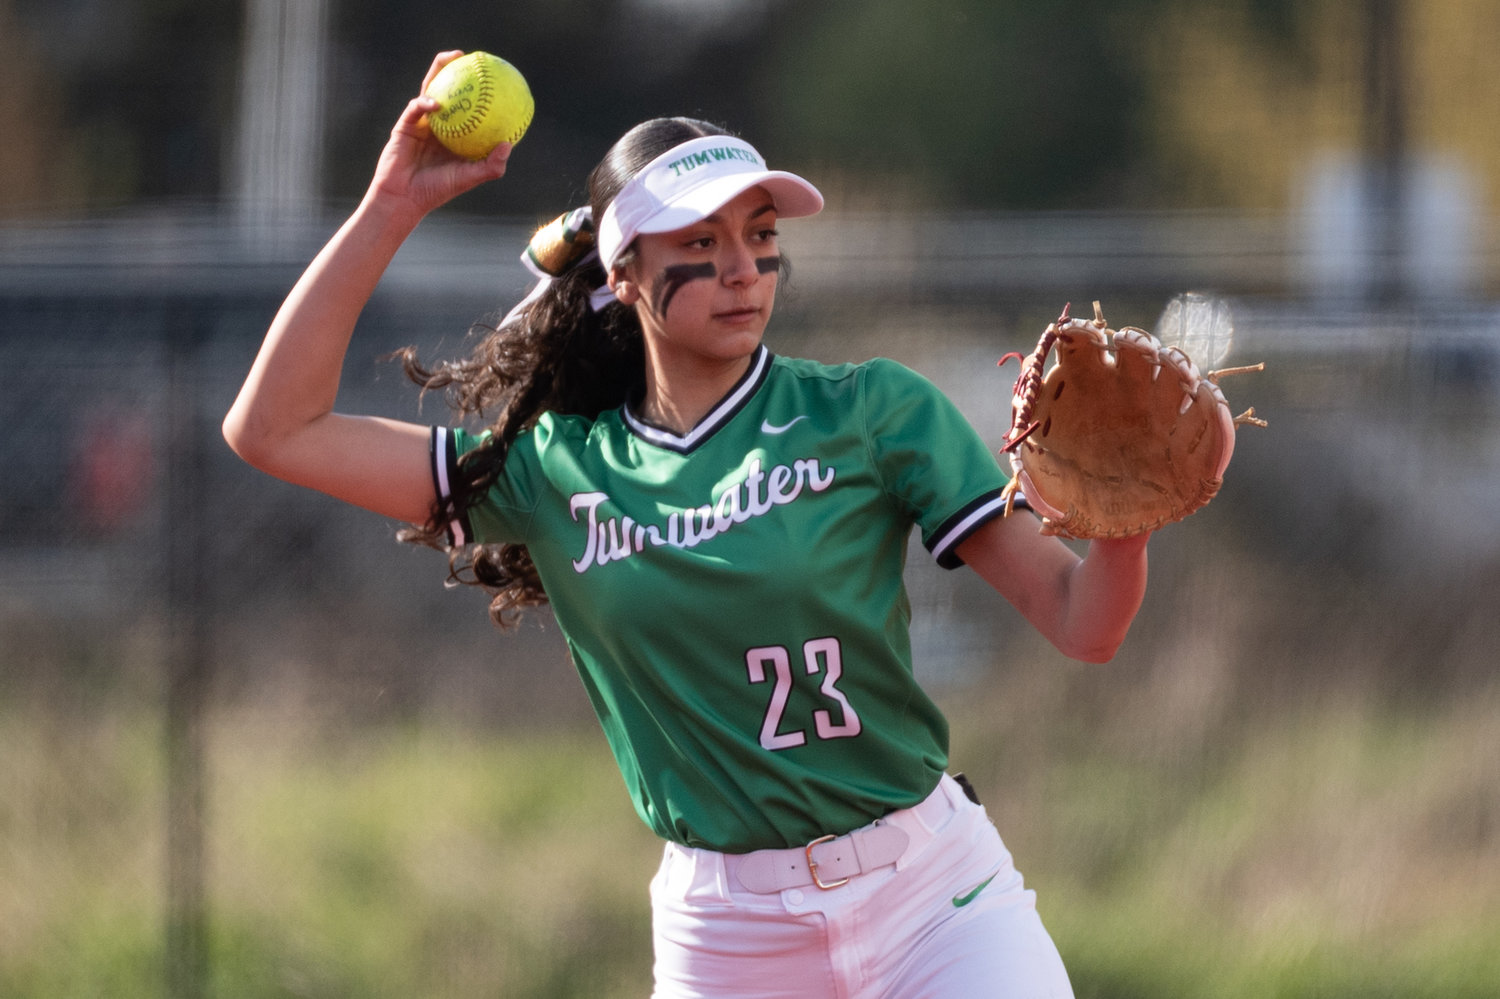 Tumwater's Jaylene Manriquez looks to throw to first base against W.F. West at Recreation Park in Chehalis April 15.